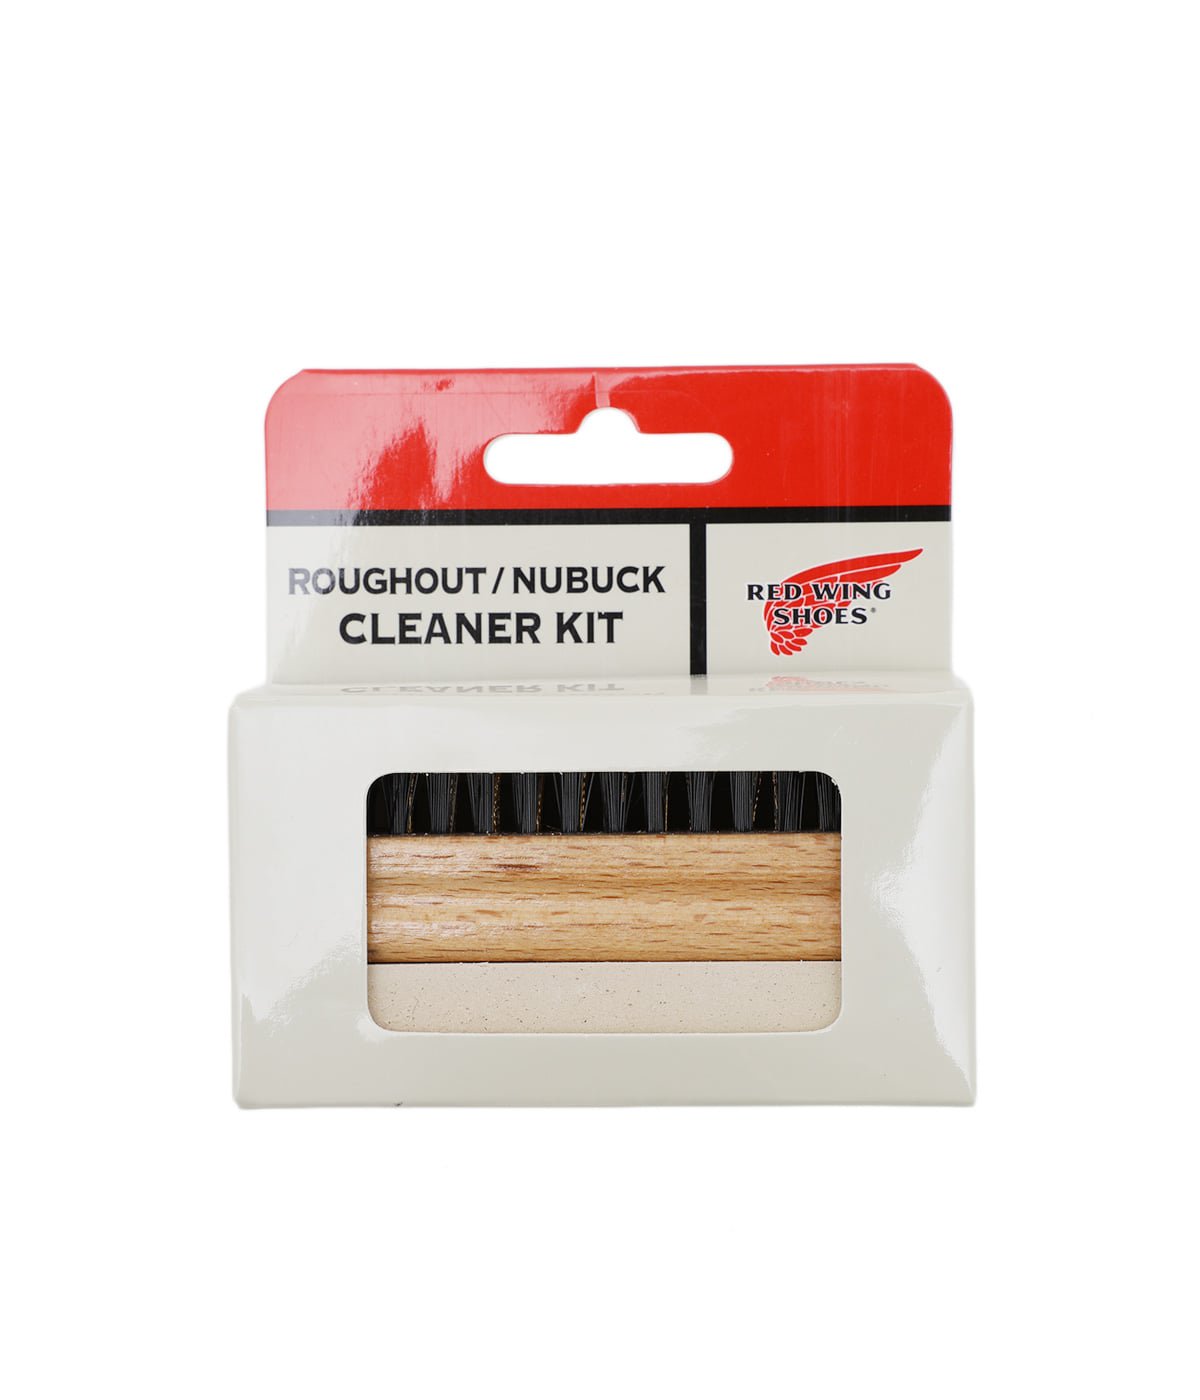 ROUGHOUT / NUBUCK CLEANER KIT